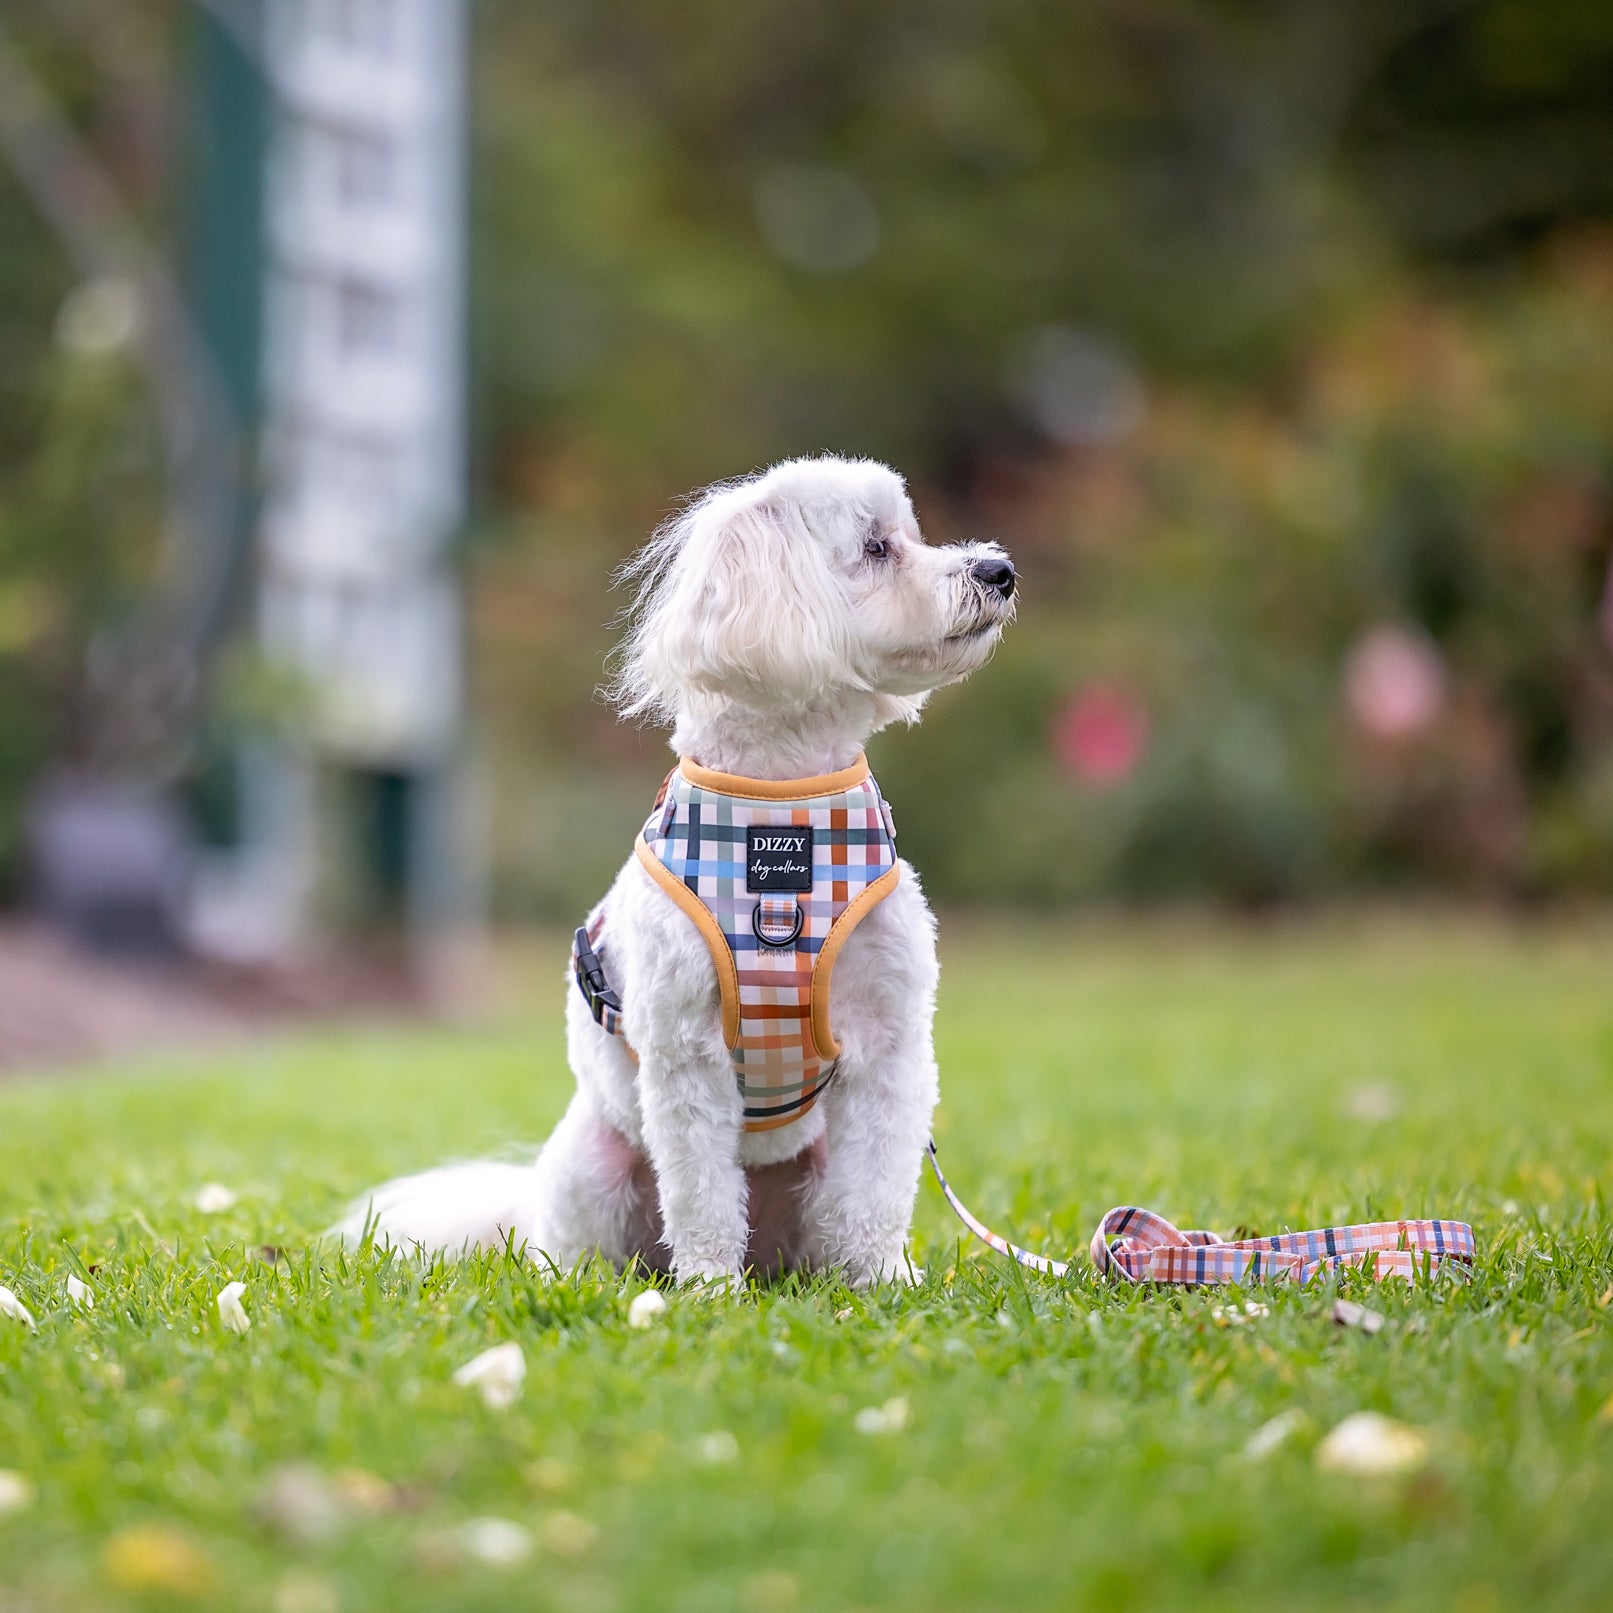 A small white dog sits on a grassy lawn, wearing a colorful gingham-patterned harness with orange trim and a label that reads 